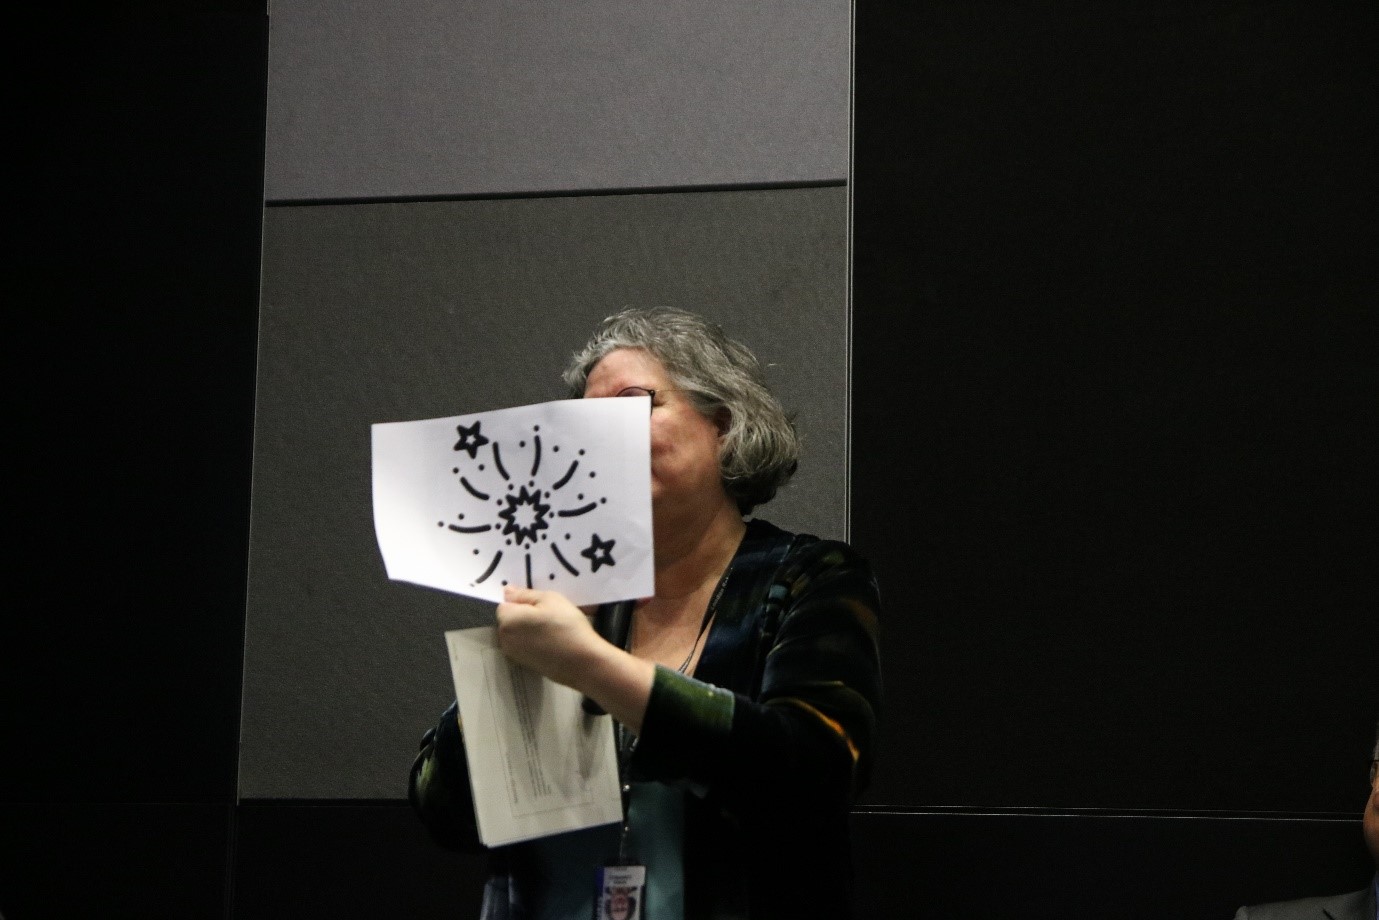 Professor Oona Campbell  used effective props during the Symposium debate